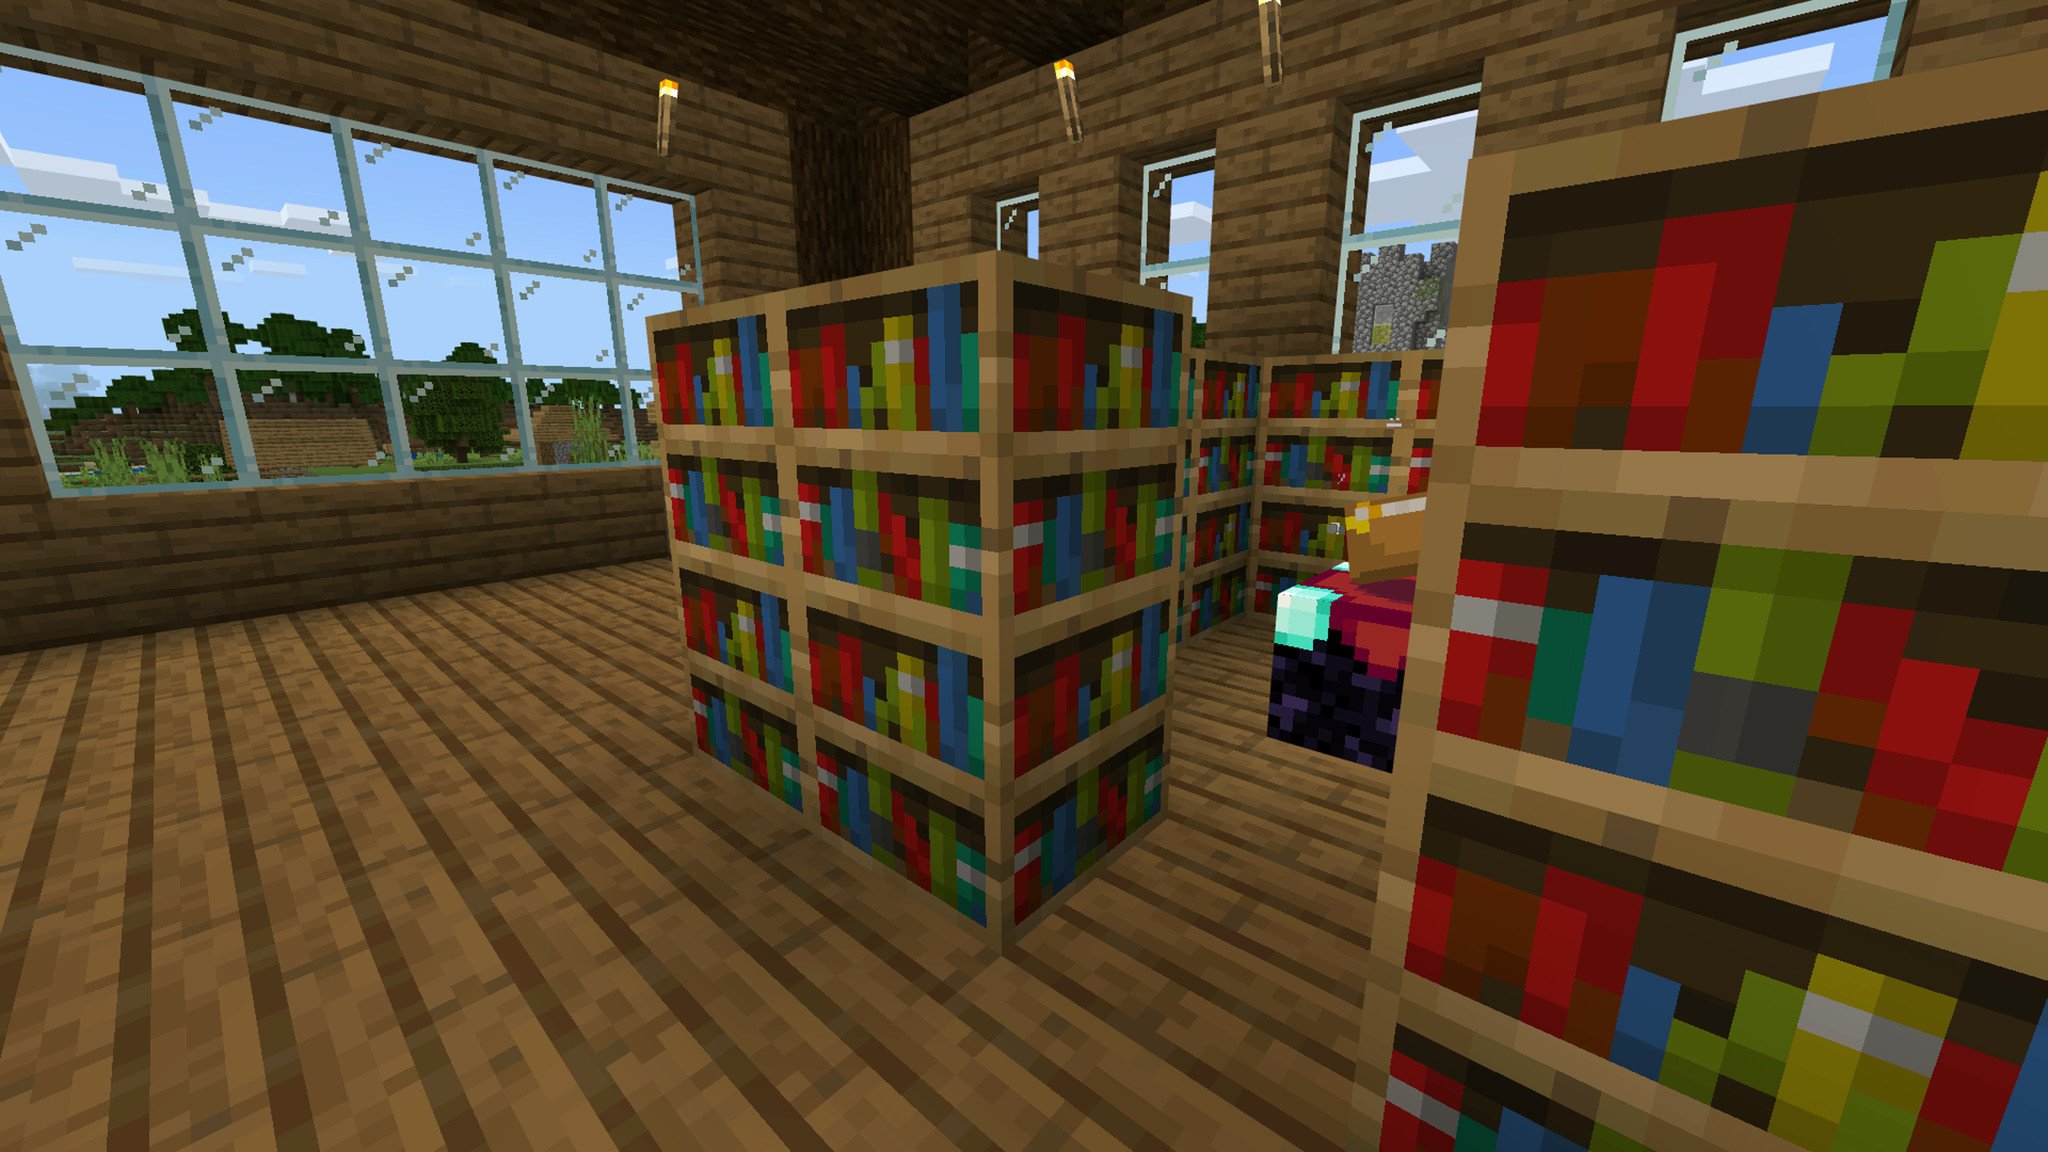 Minecraft Guide To Enchanting Setup, How Many Bookcases For Max Enchanting Table